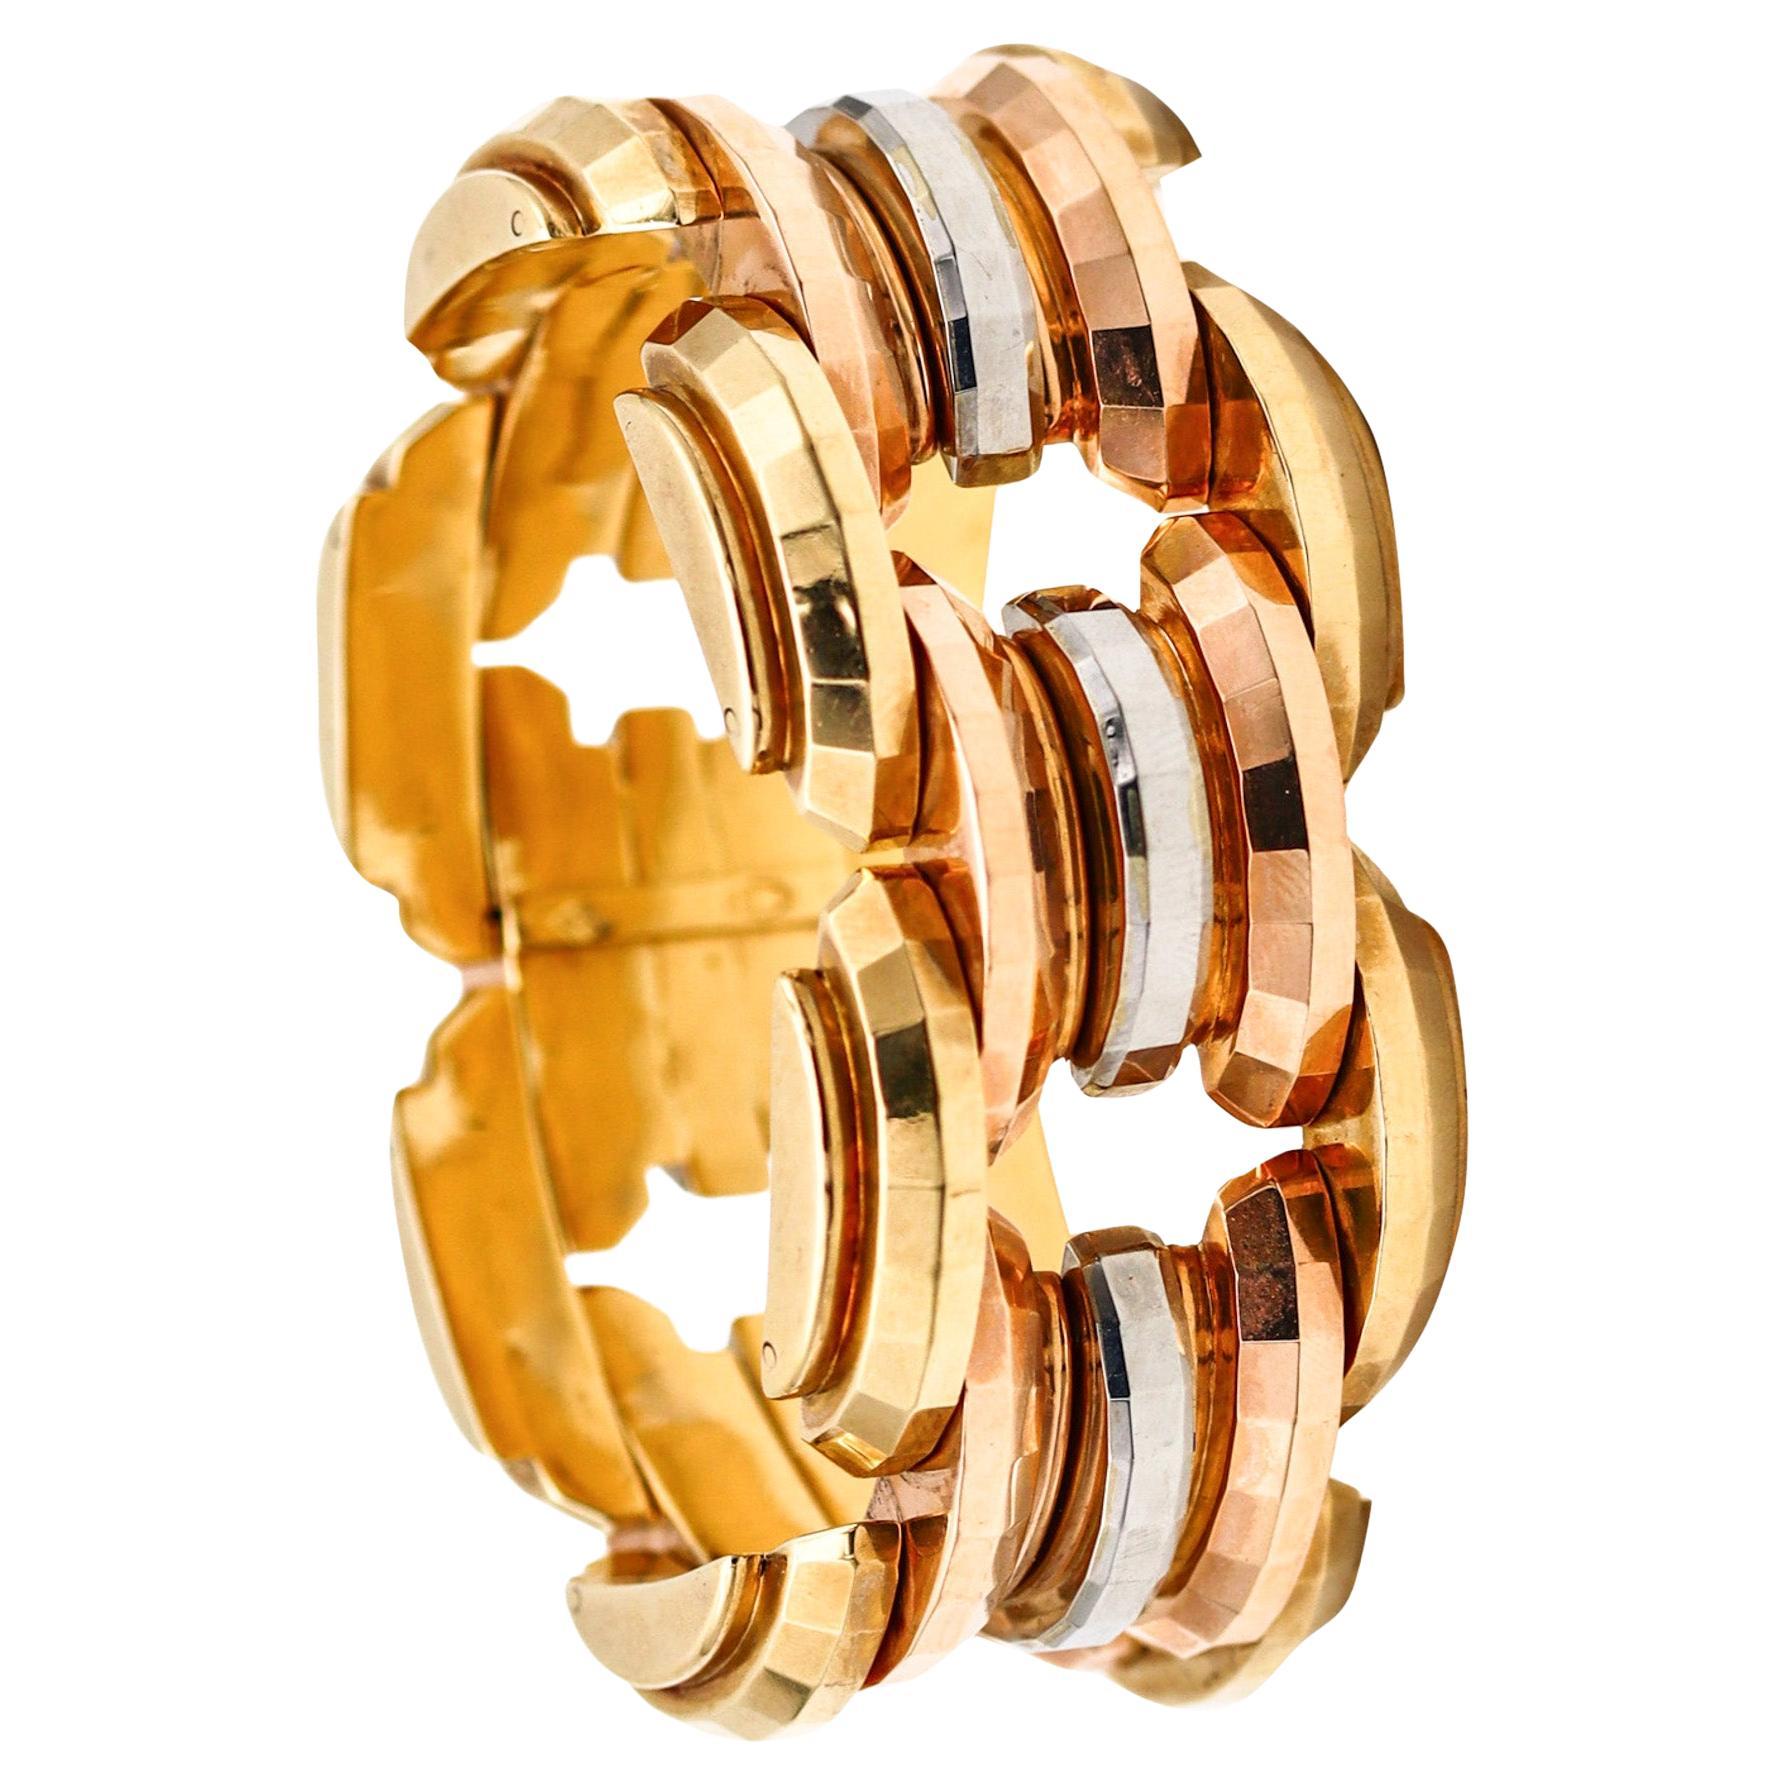 Italian 1934 Art Deco Geometric Faceted Bracelet In Three Colors Of 18Kt Gold